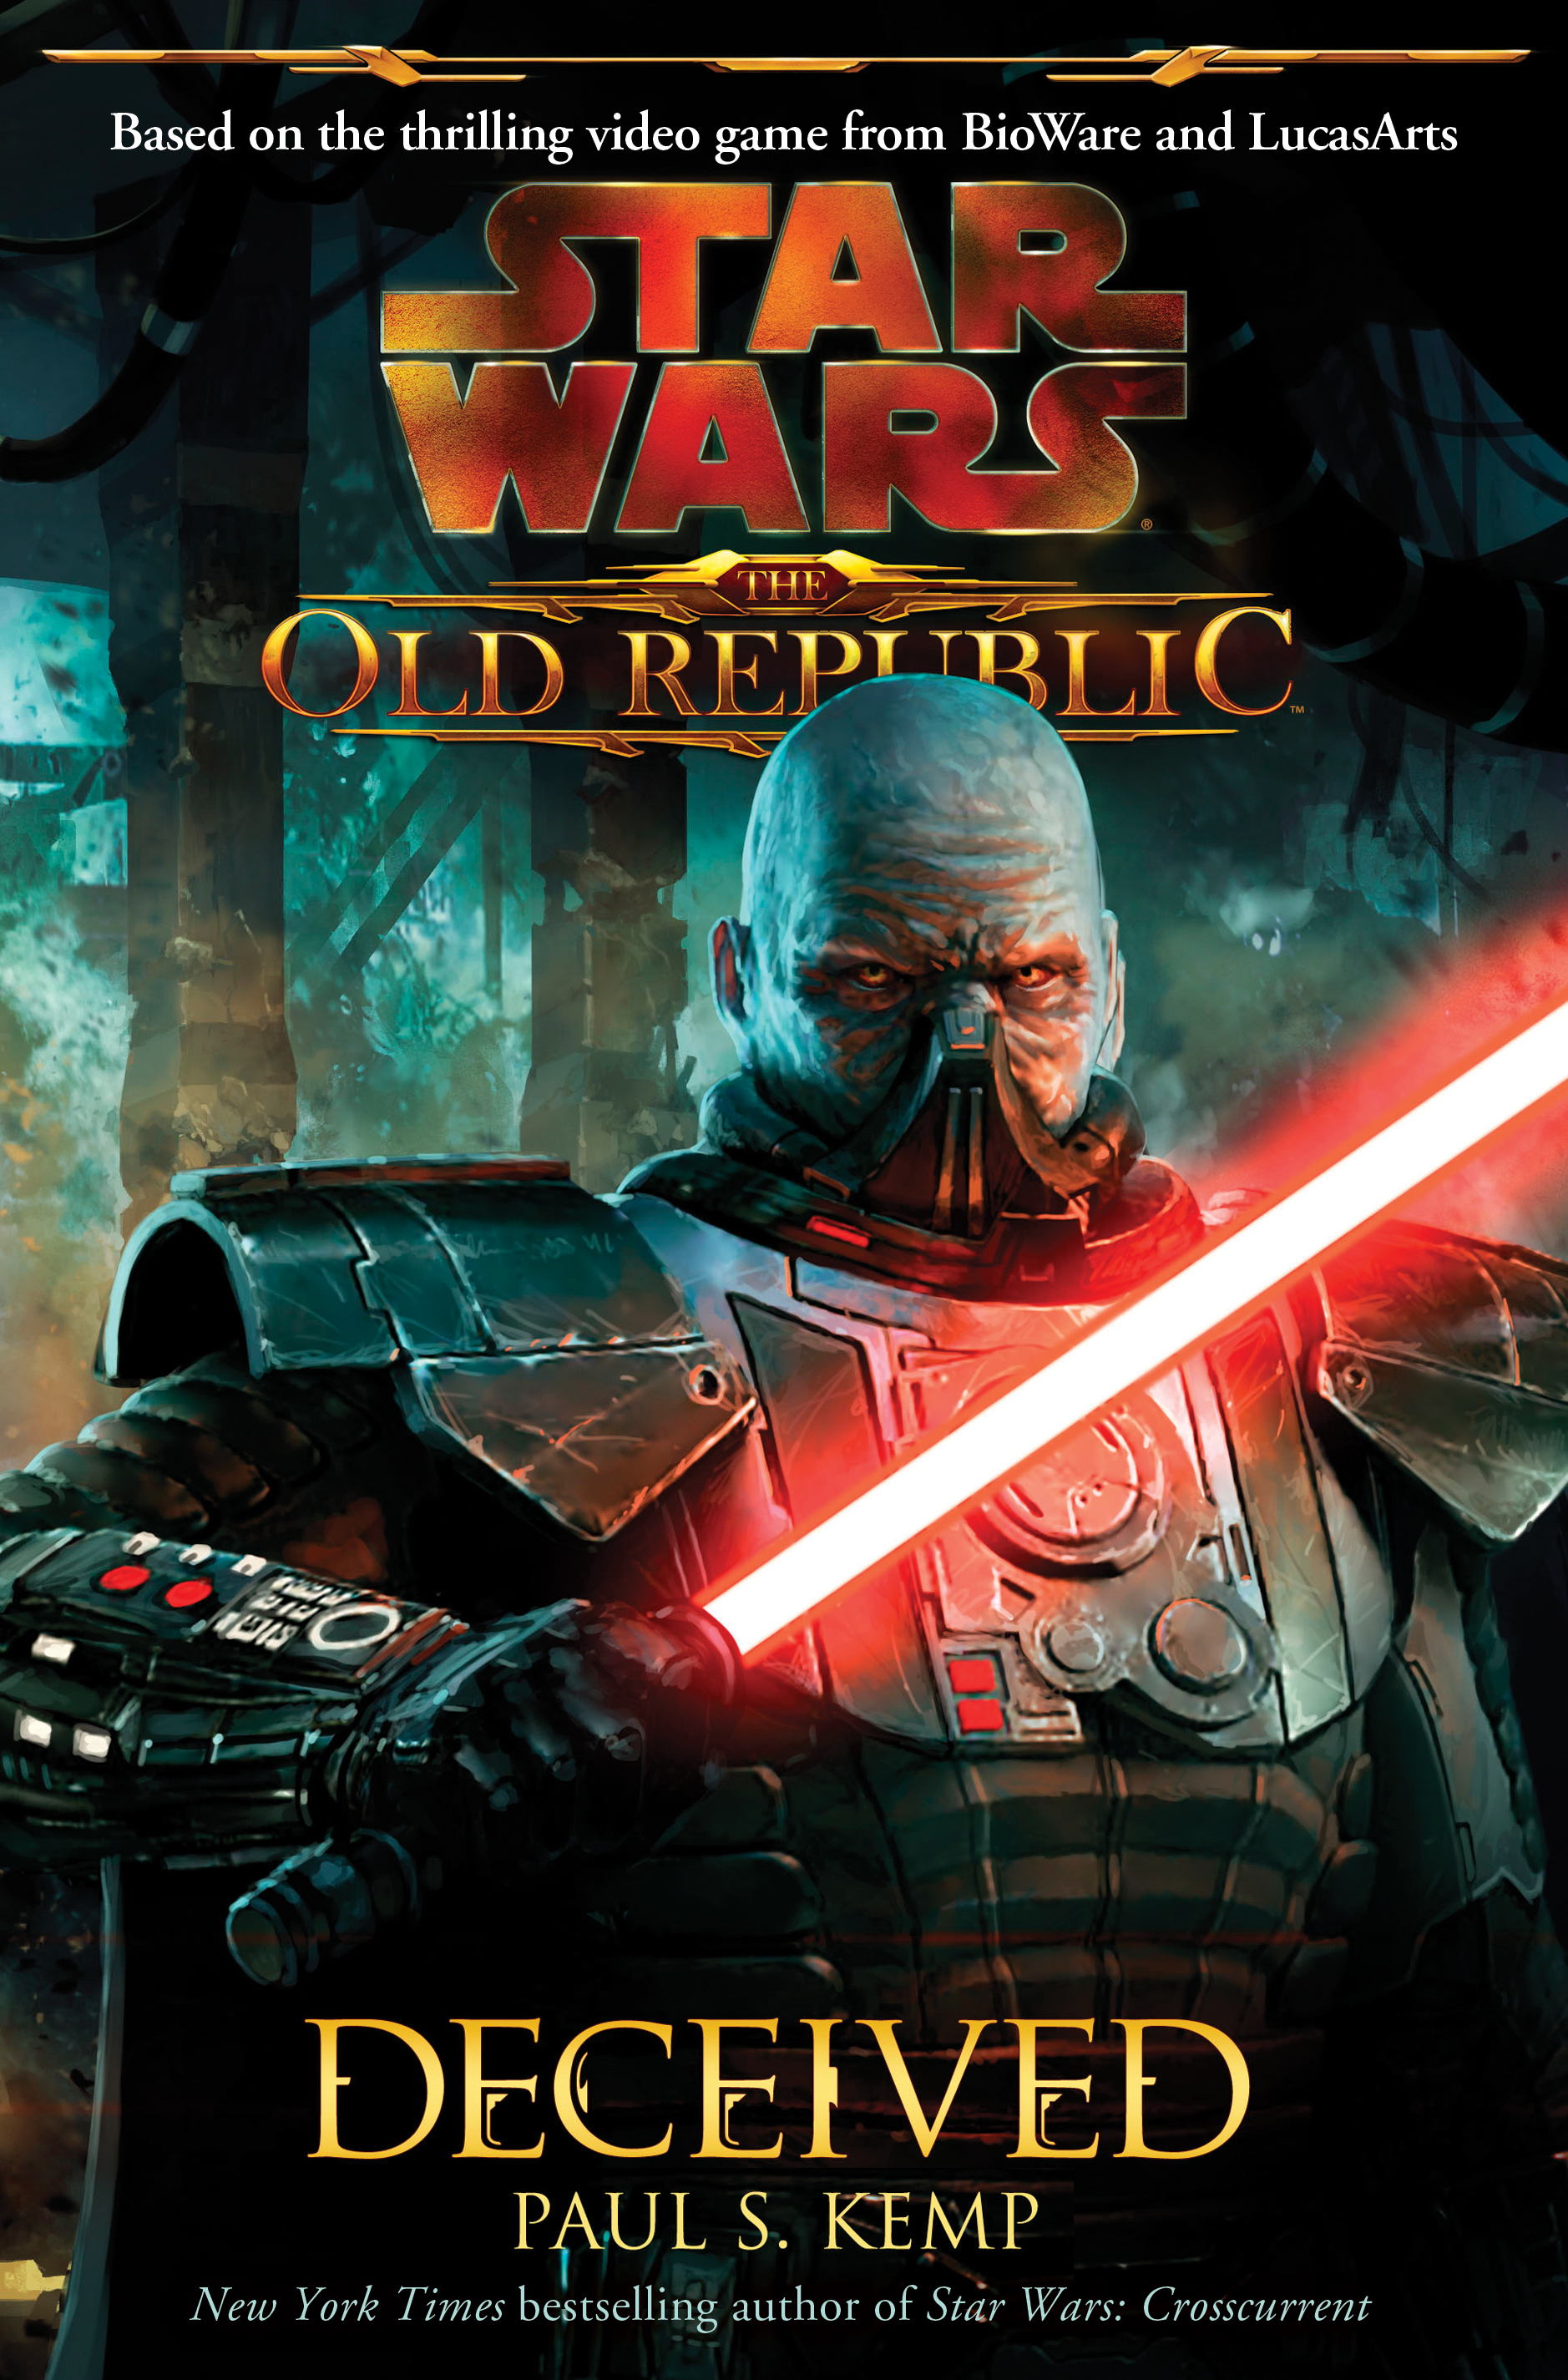 Star Wars: The Old Republic: Deceived Paul S. Kemp